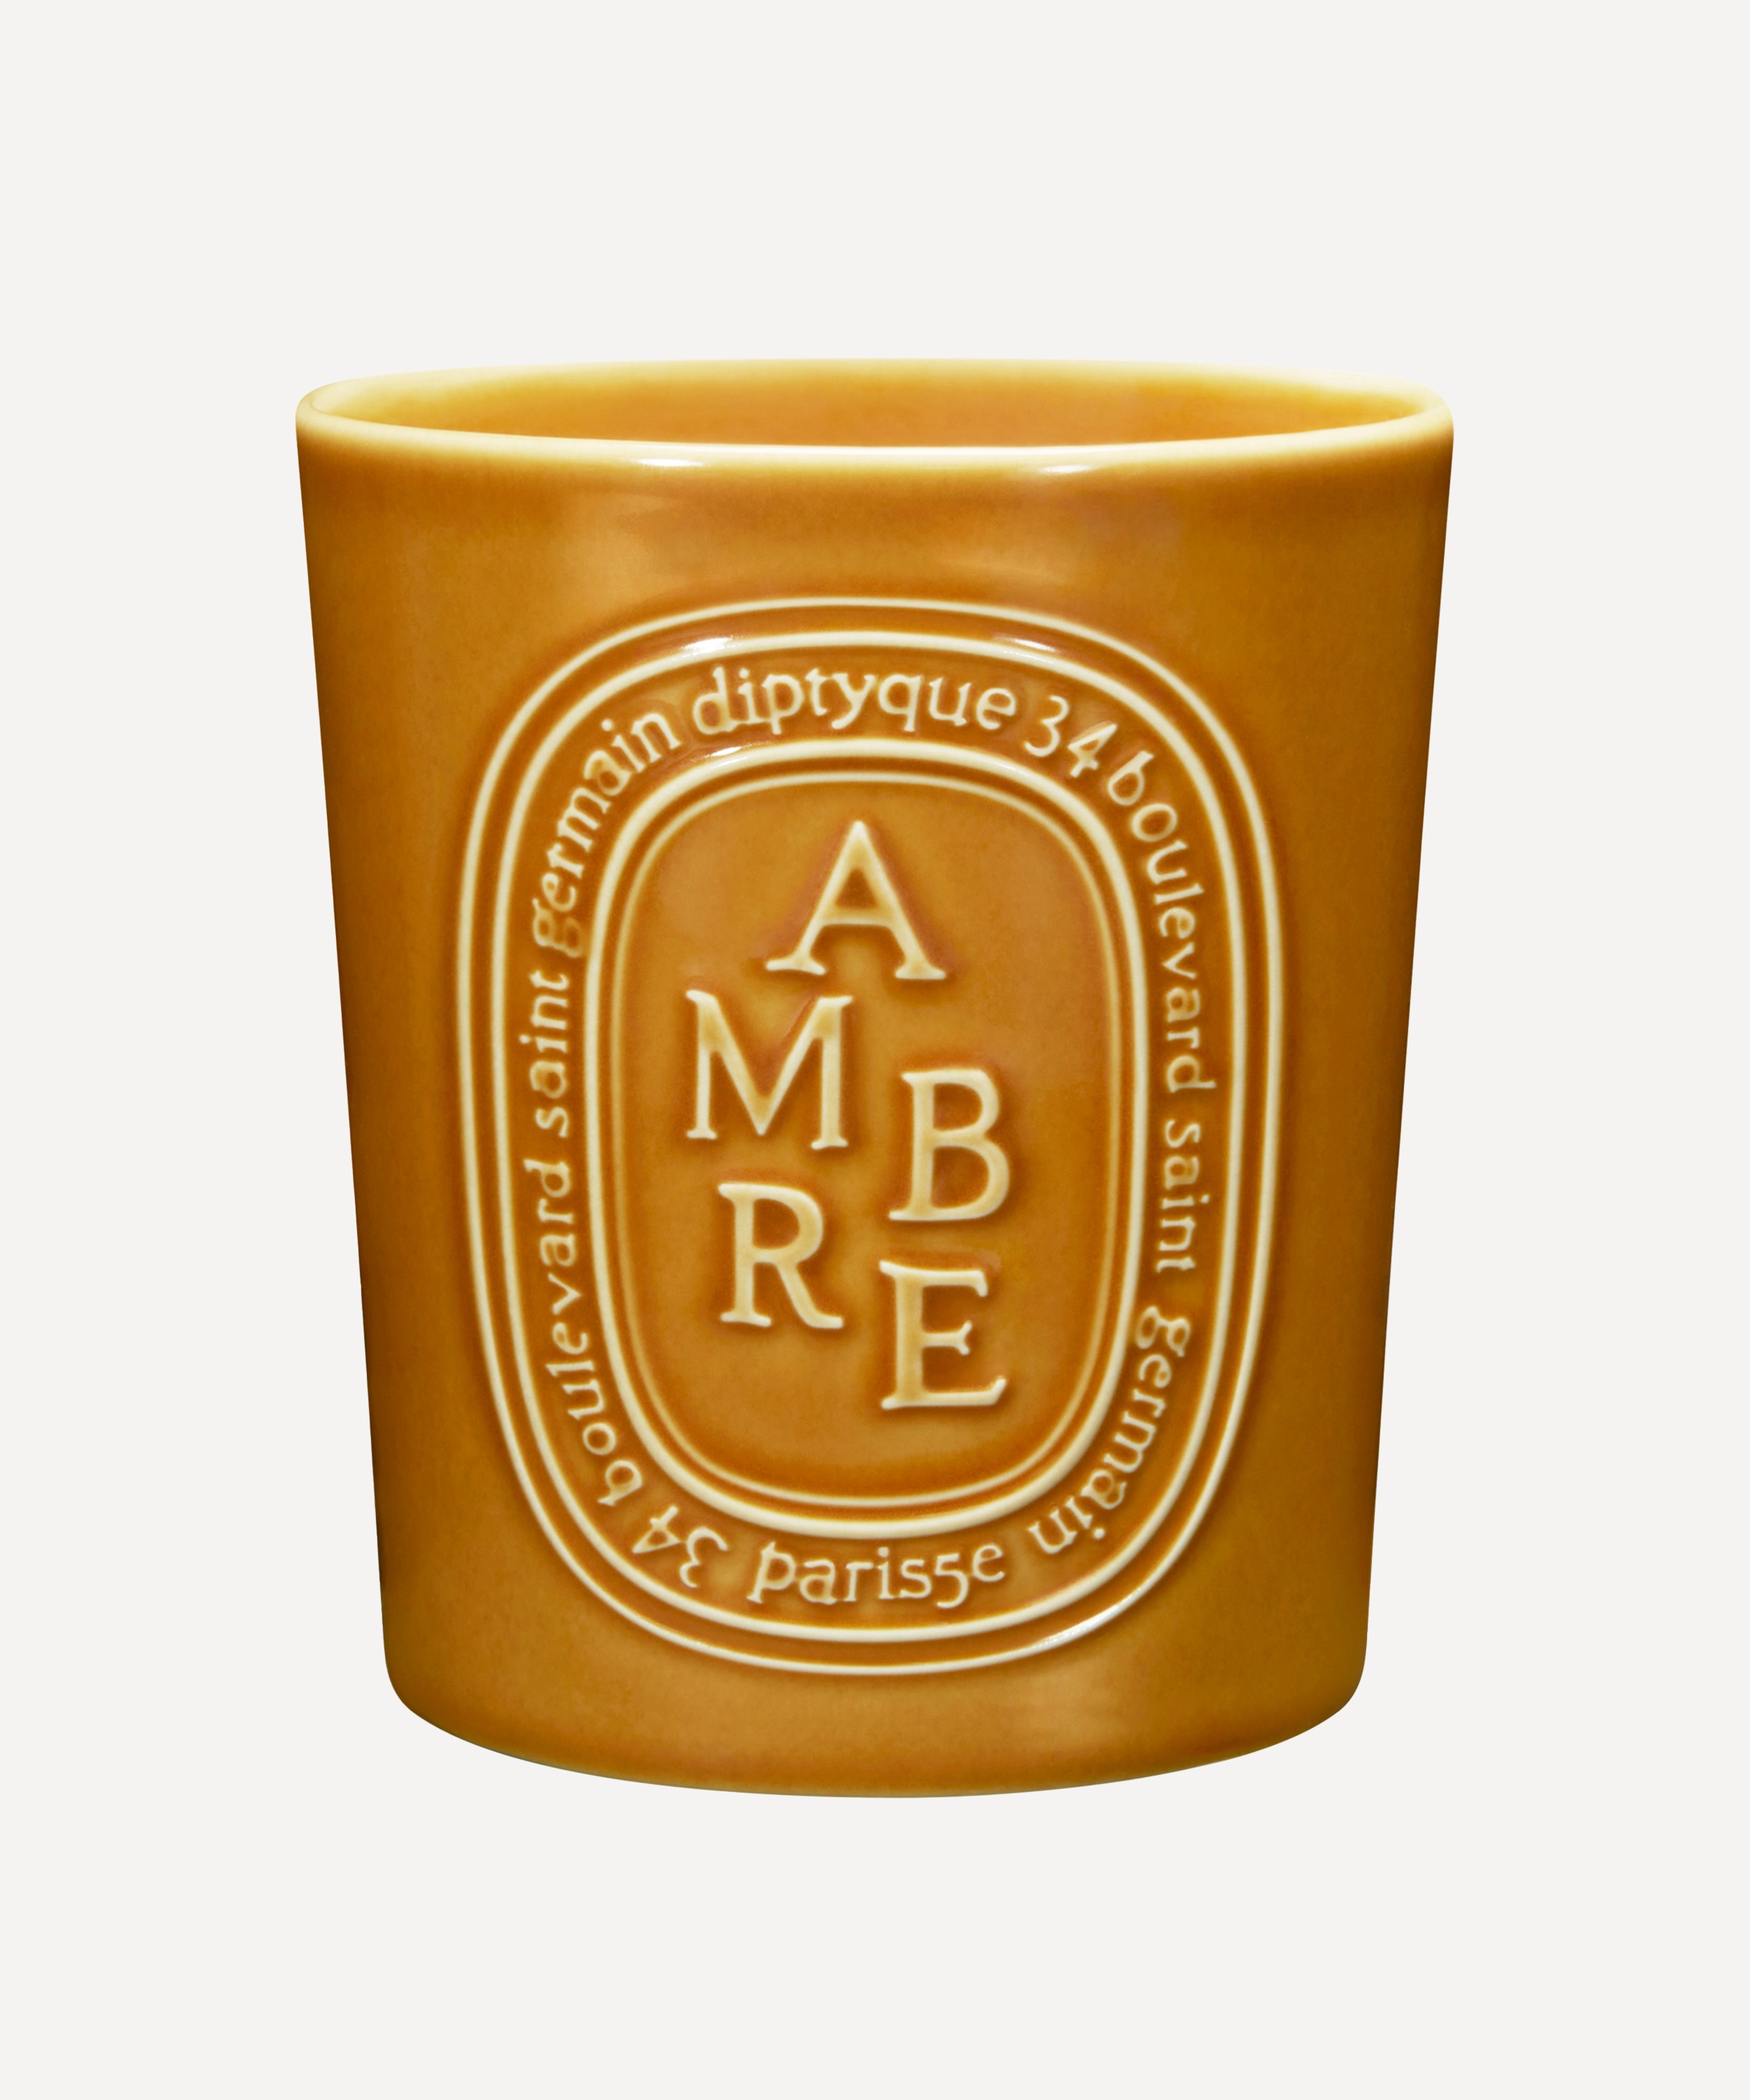 Diptyque - Ambre Three Wick Candle 600g